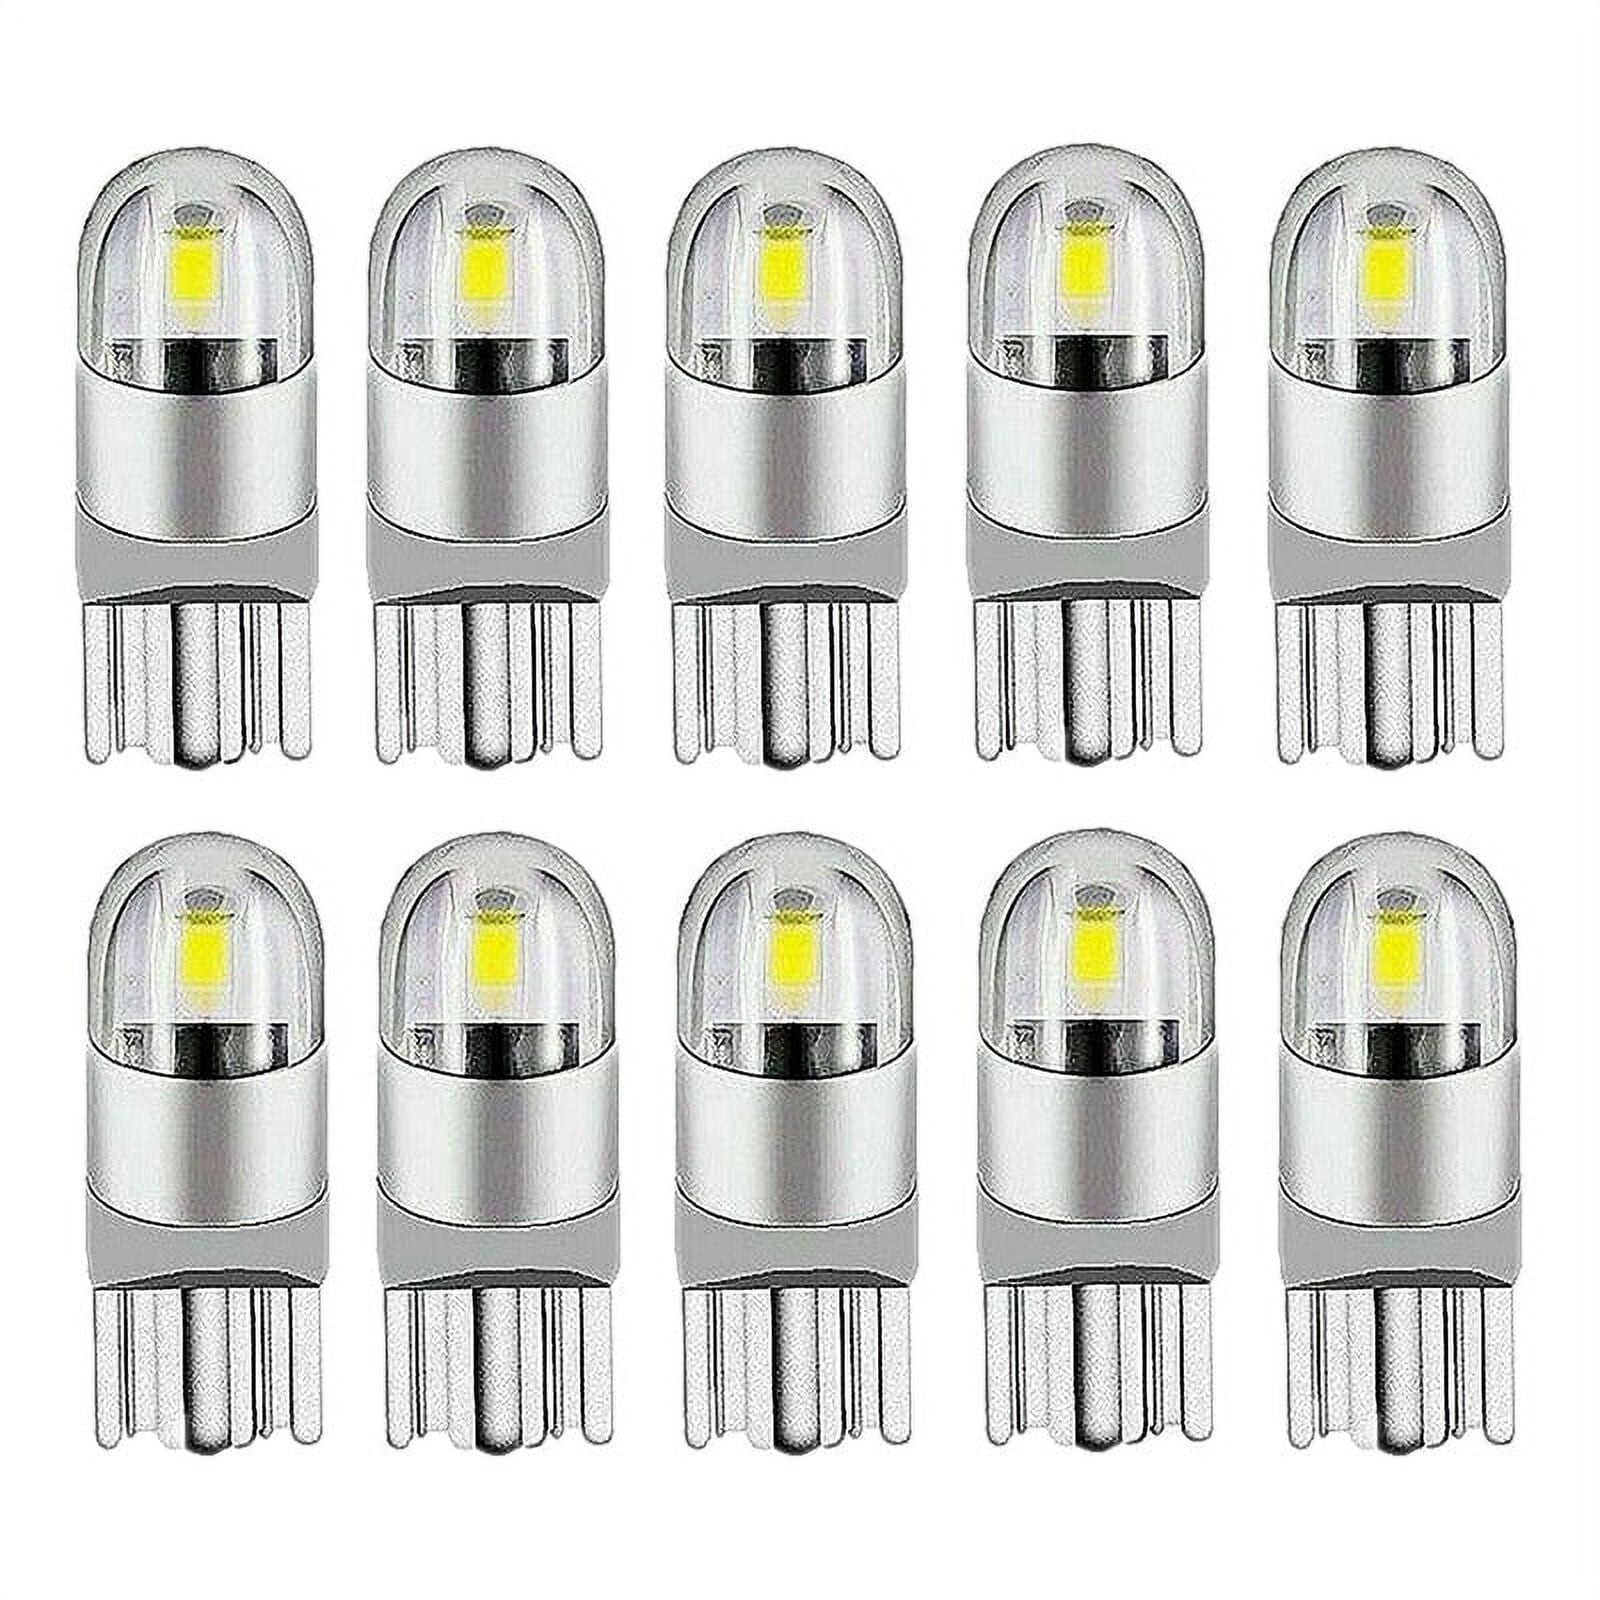 10pcs IC T10 LED Bulb Canbus 5W5 Car W5W LED Signal Light 12V 6000K Auto  Wedge Side Interior Dome Reading Lamps 4014 24SMD White - AliExpress